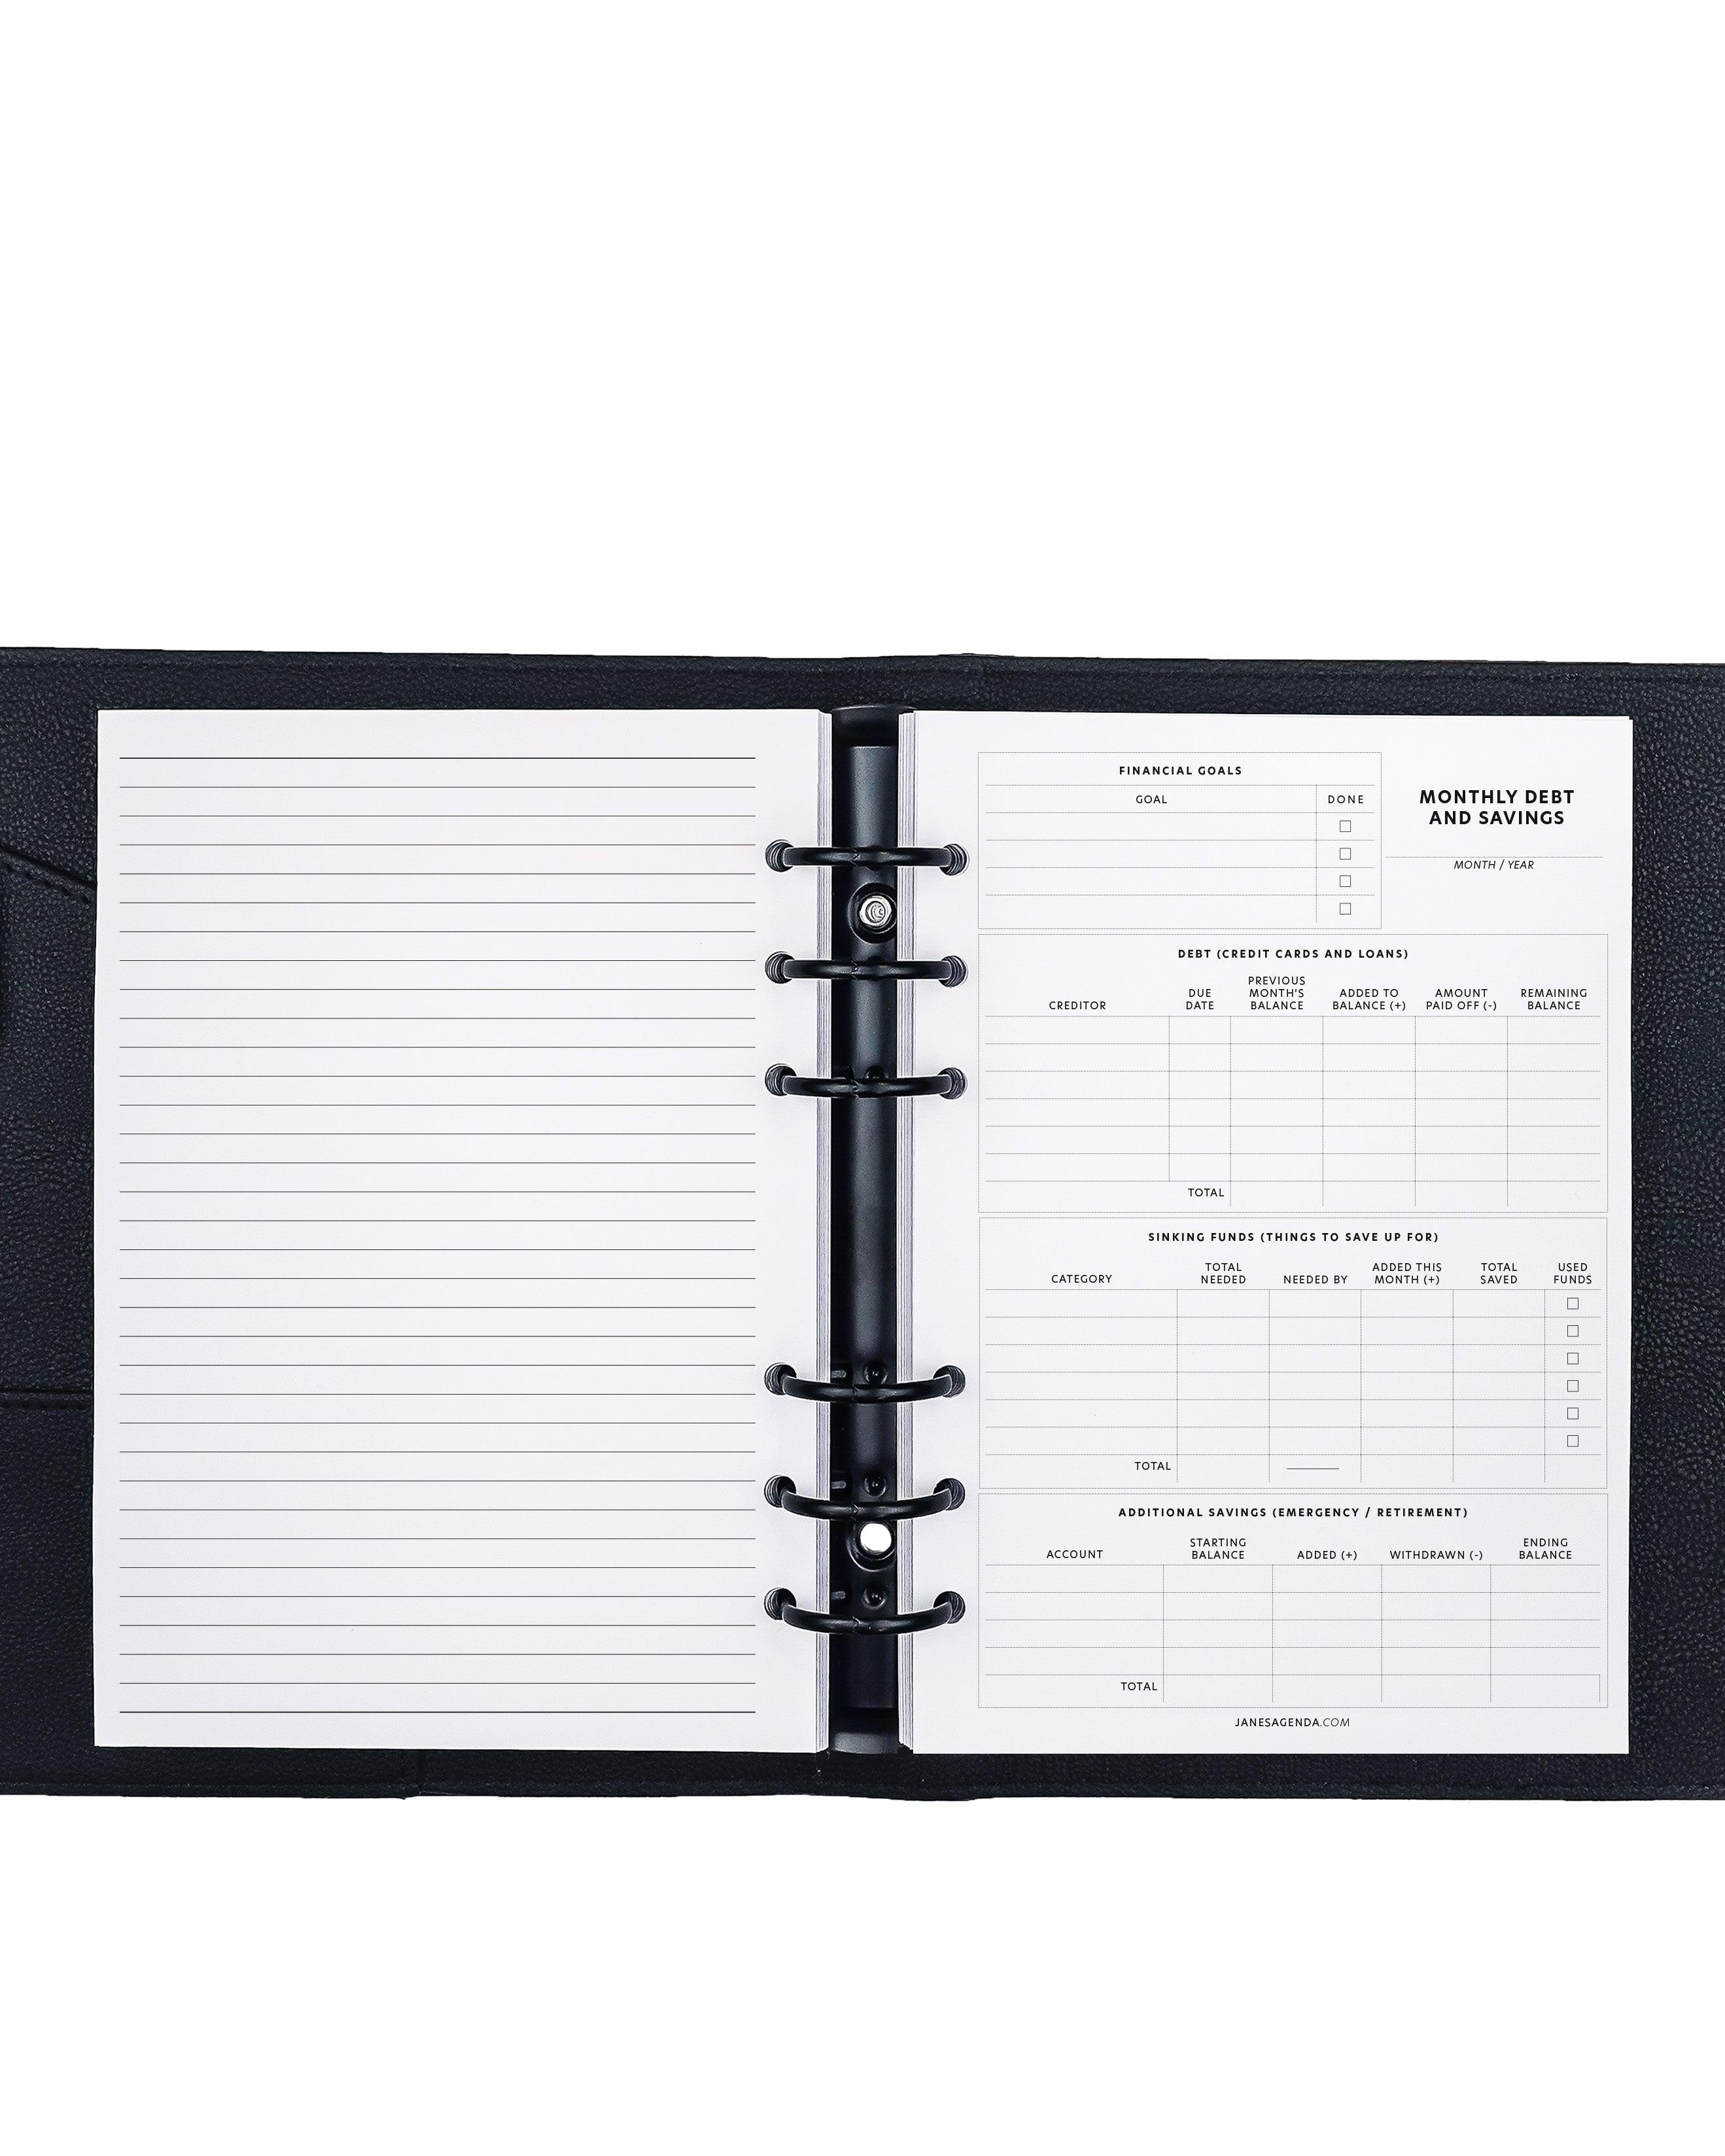 Monthly budgeting planner inserts for discbound and six ring planner systems by janes Agenda.